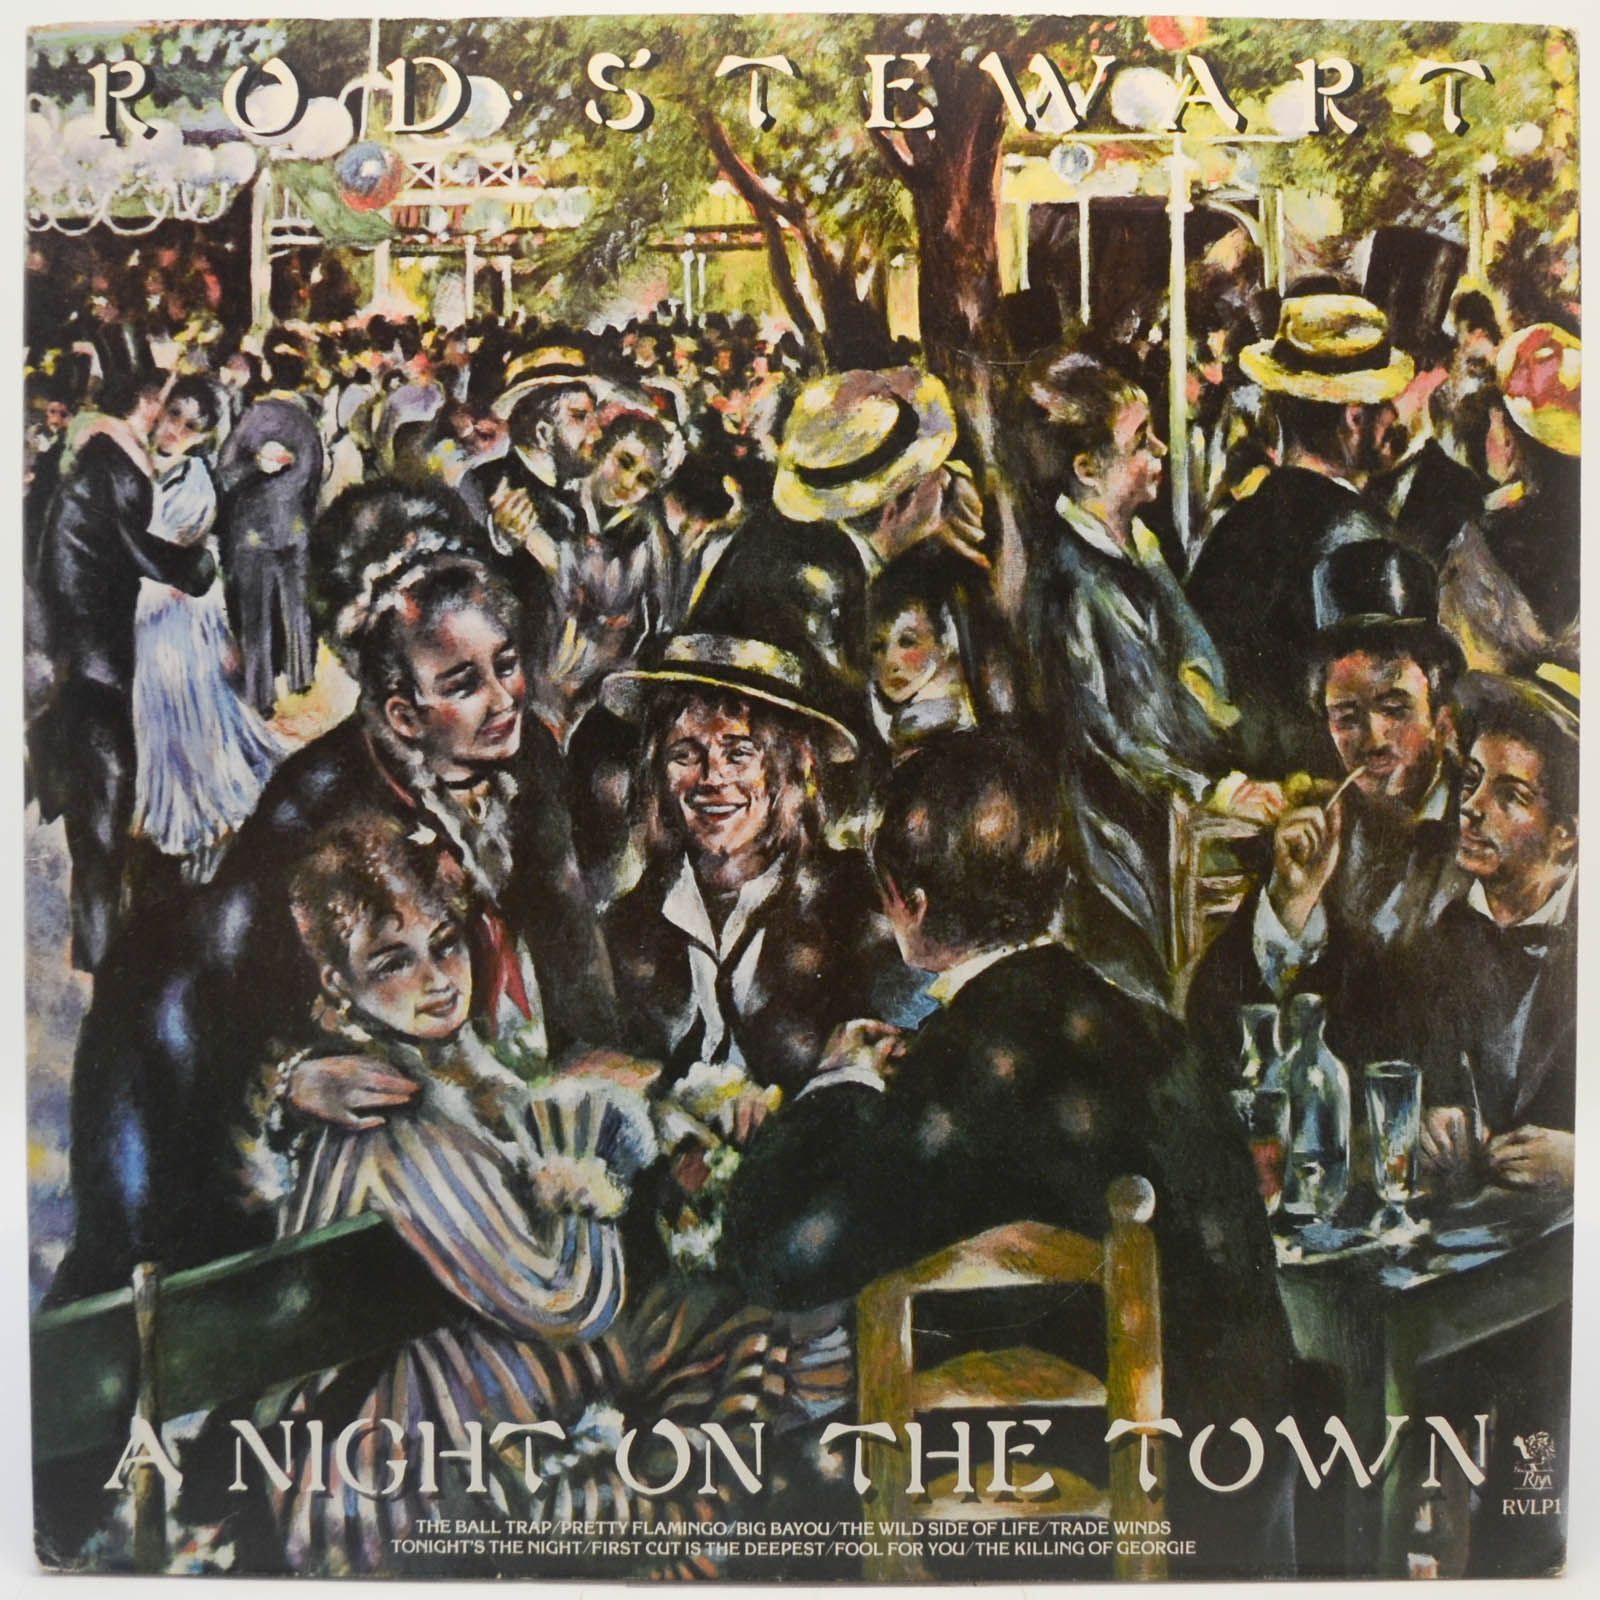 Rod Stewart — A Night On The Town (1-st, UK), 1976